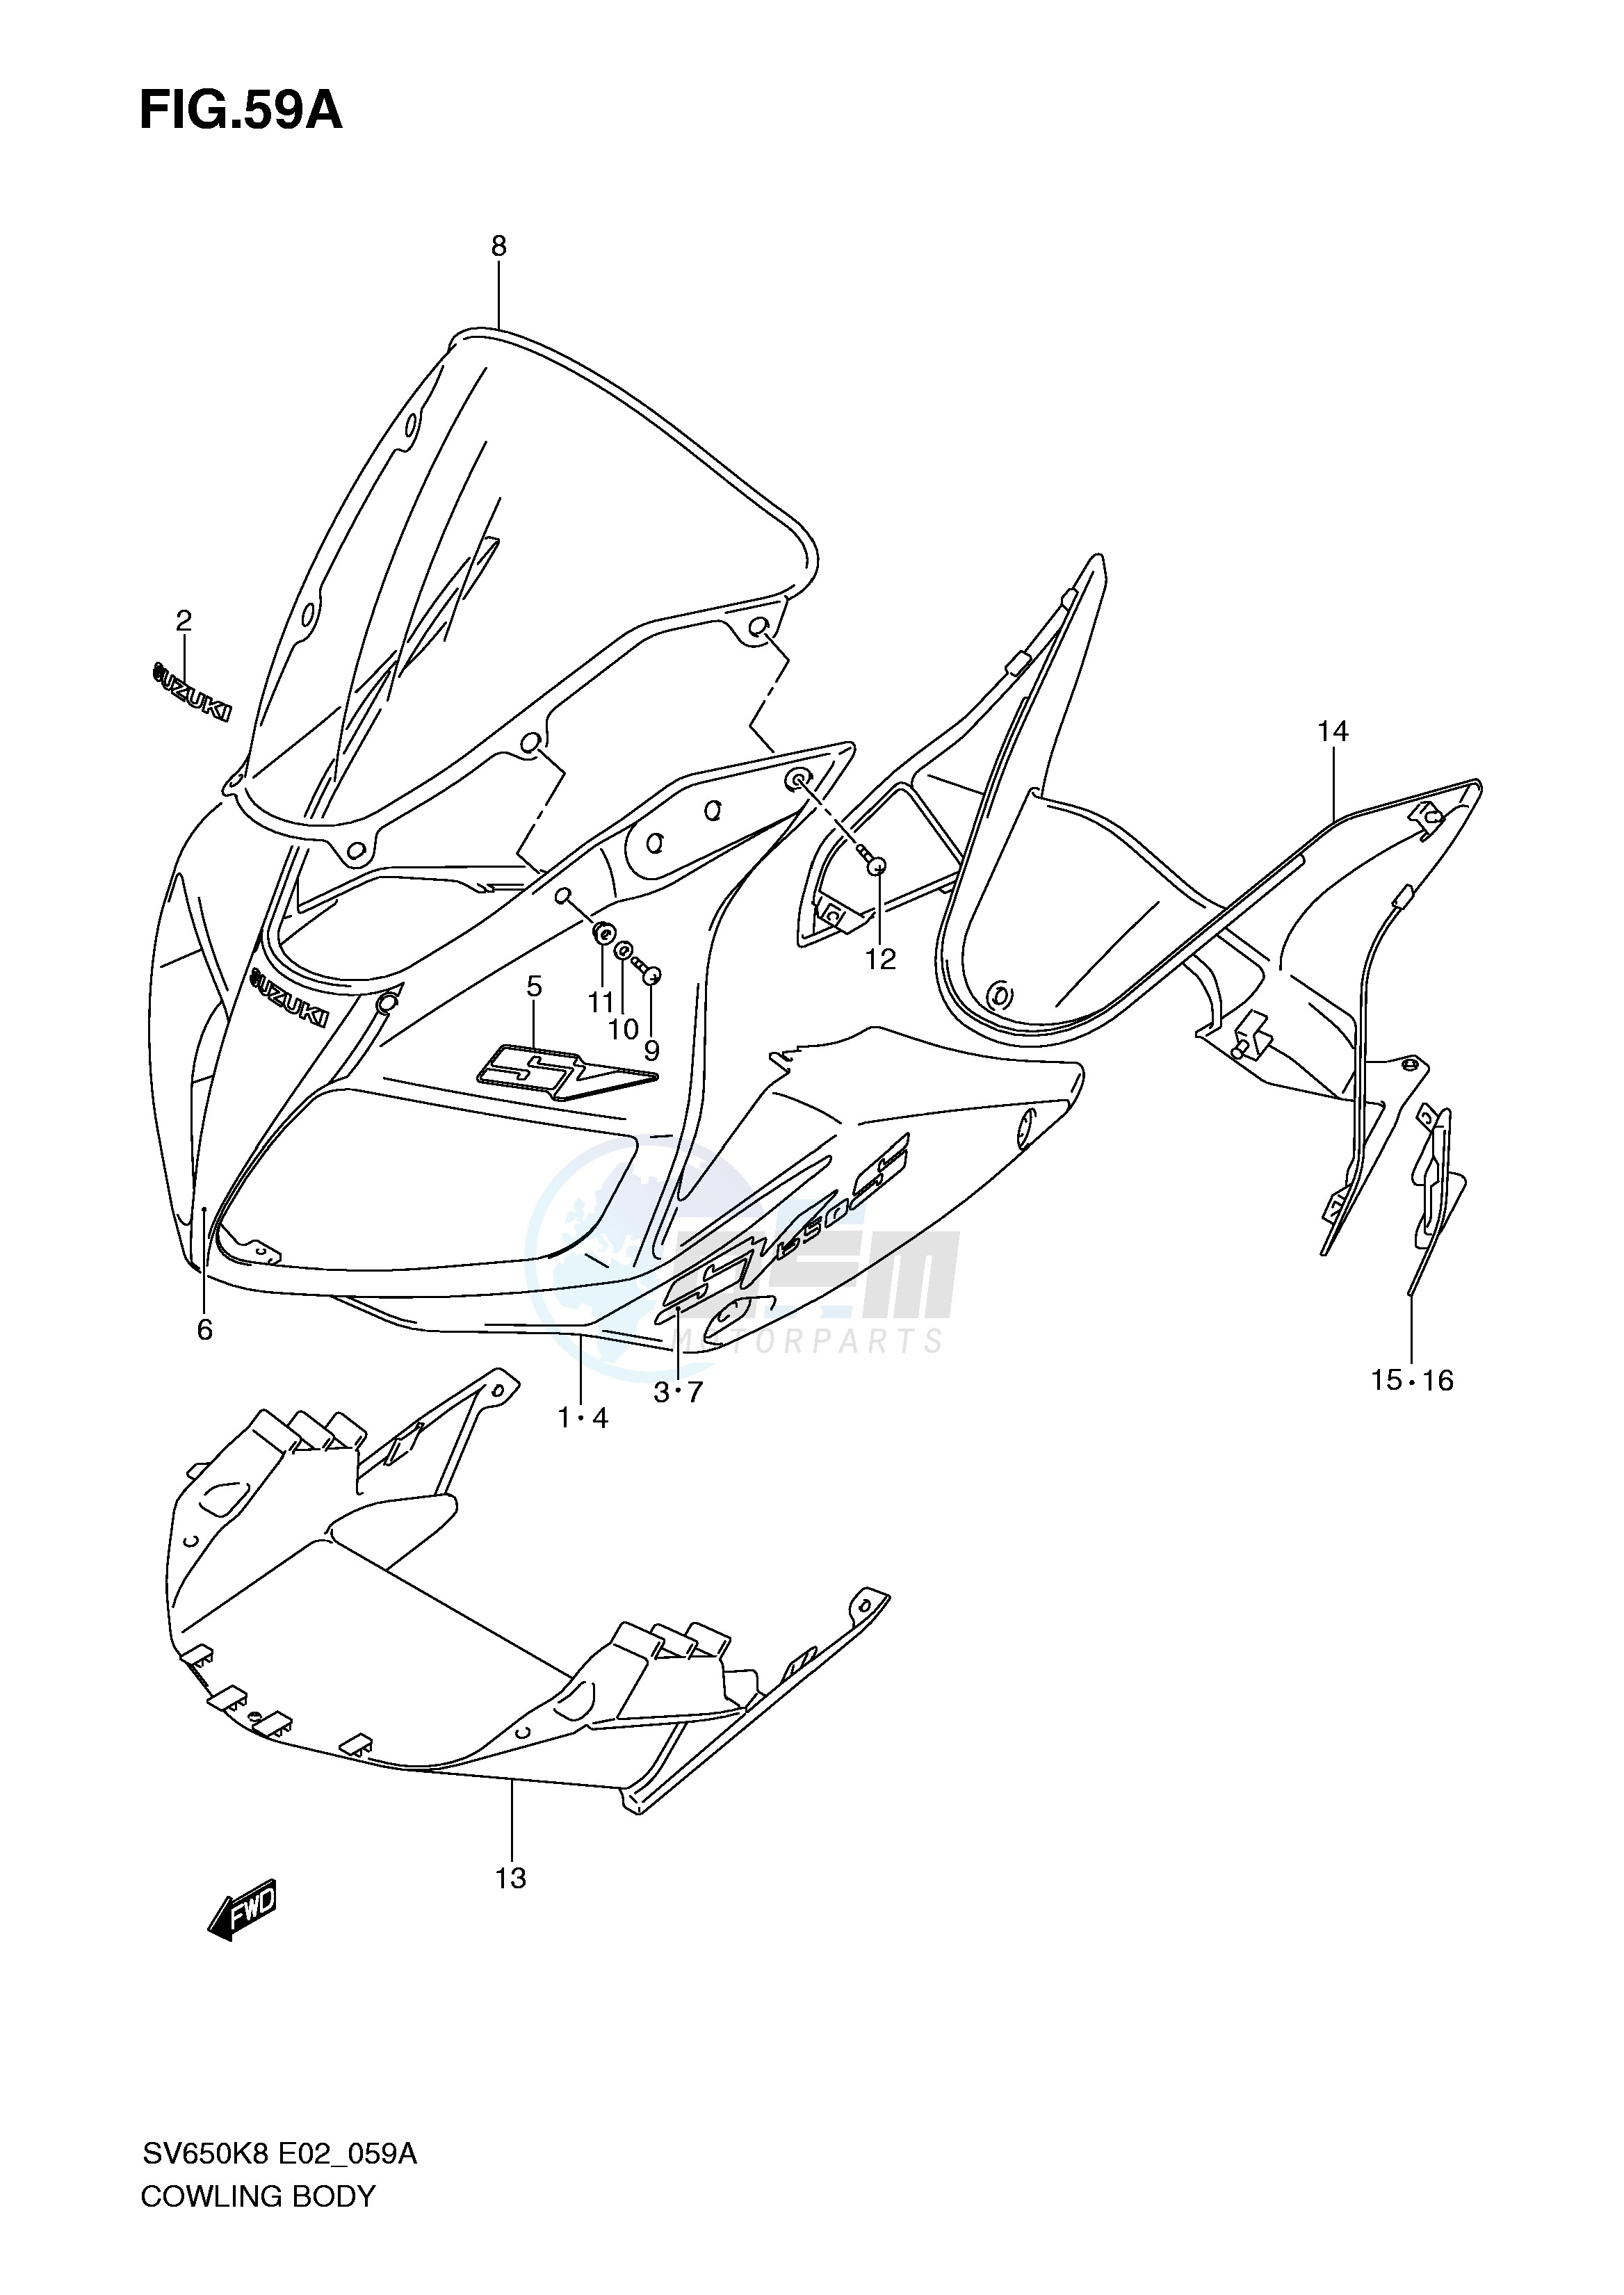 COWLING BODY (MODEL K9 WITH COWLING) blueprint